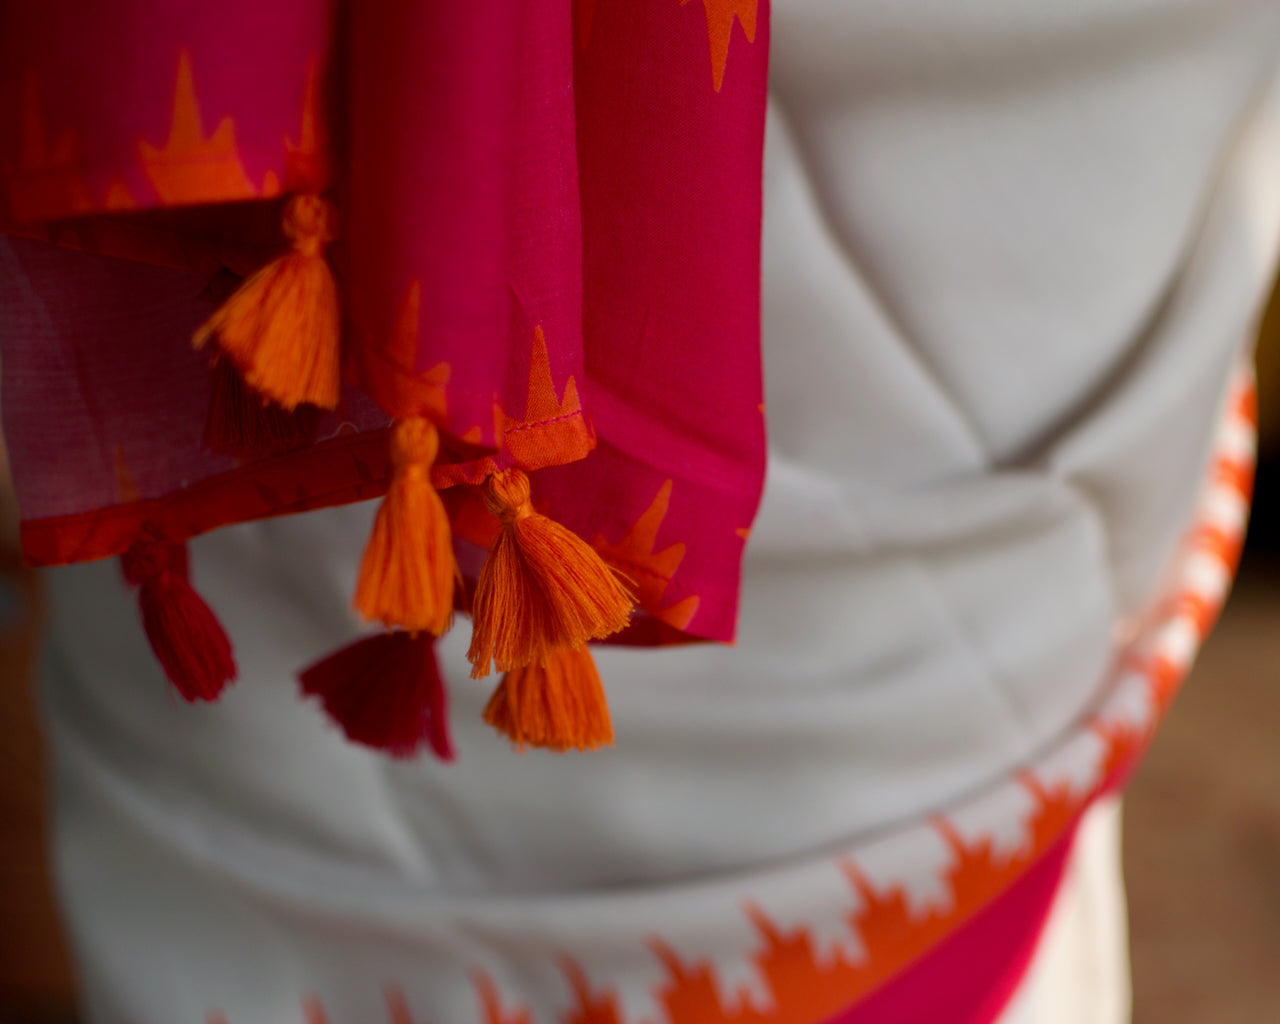 Muslin handcrafted, naturally dyed saree in a shade of white with popping colour combination of orange and pink.